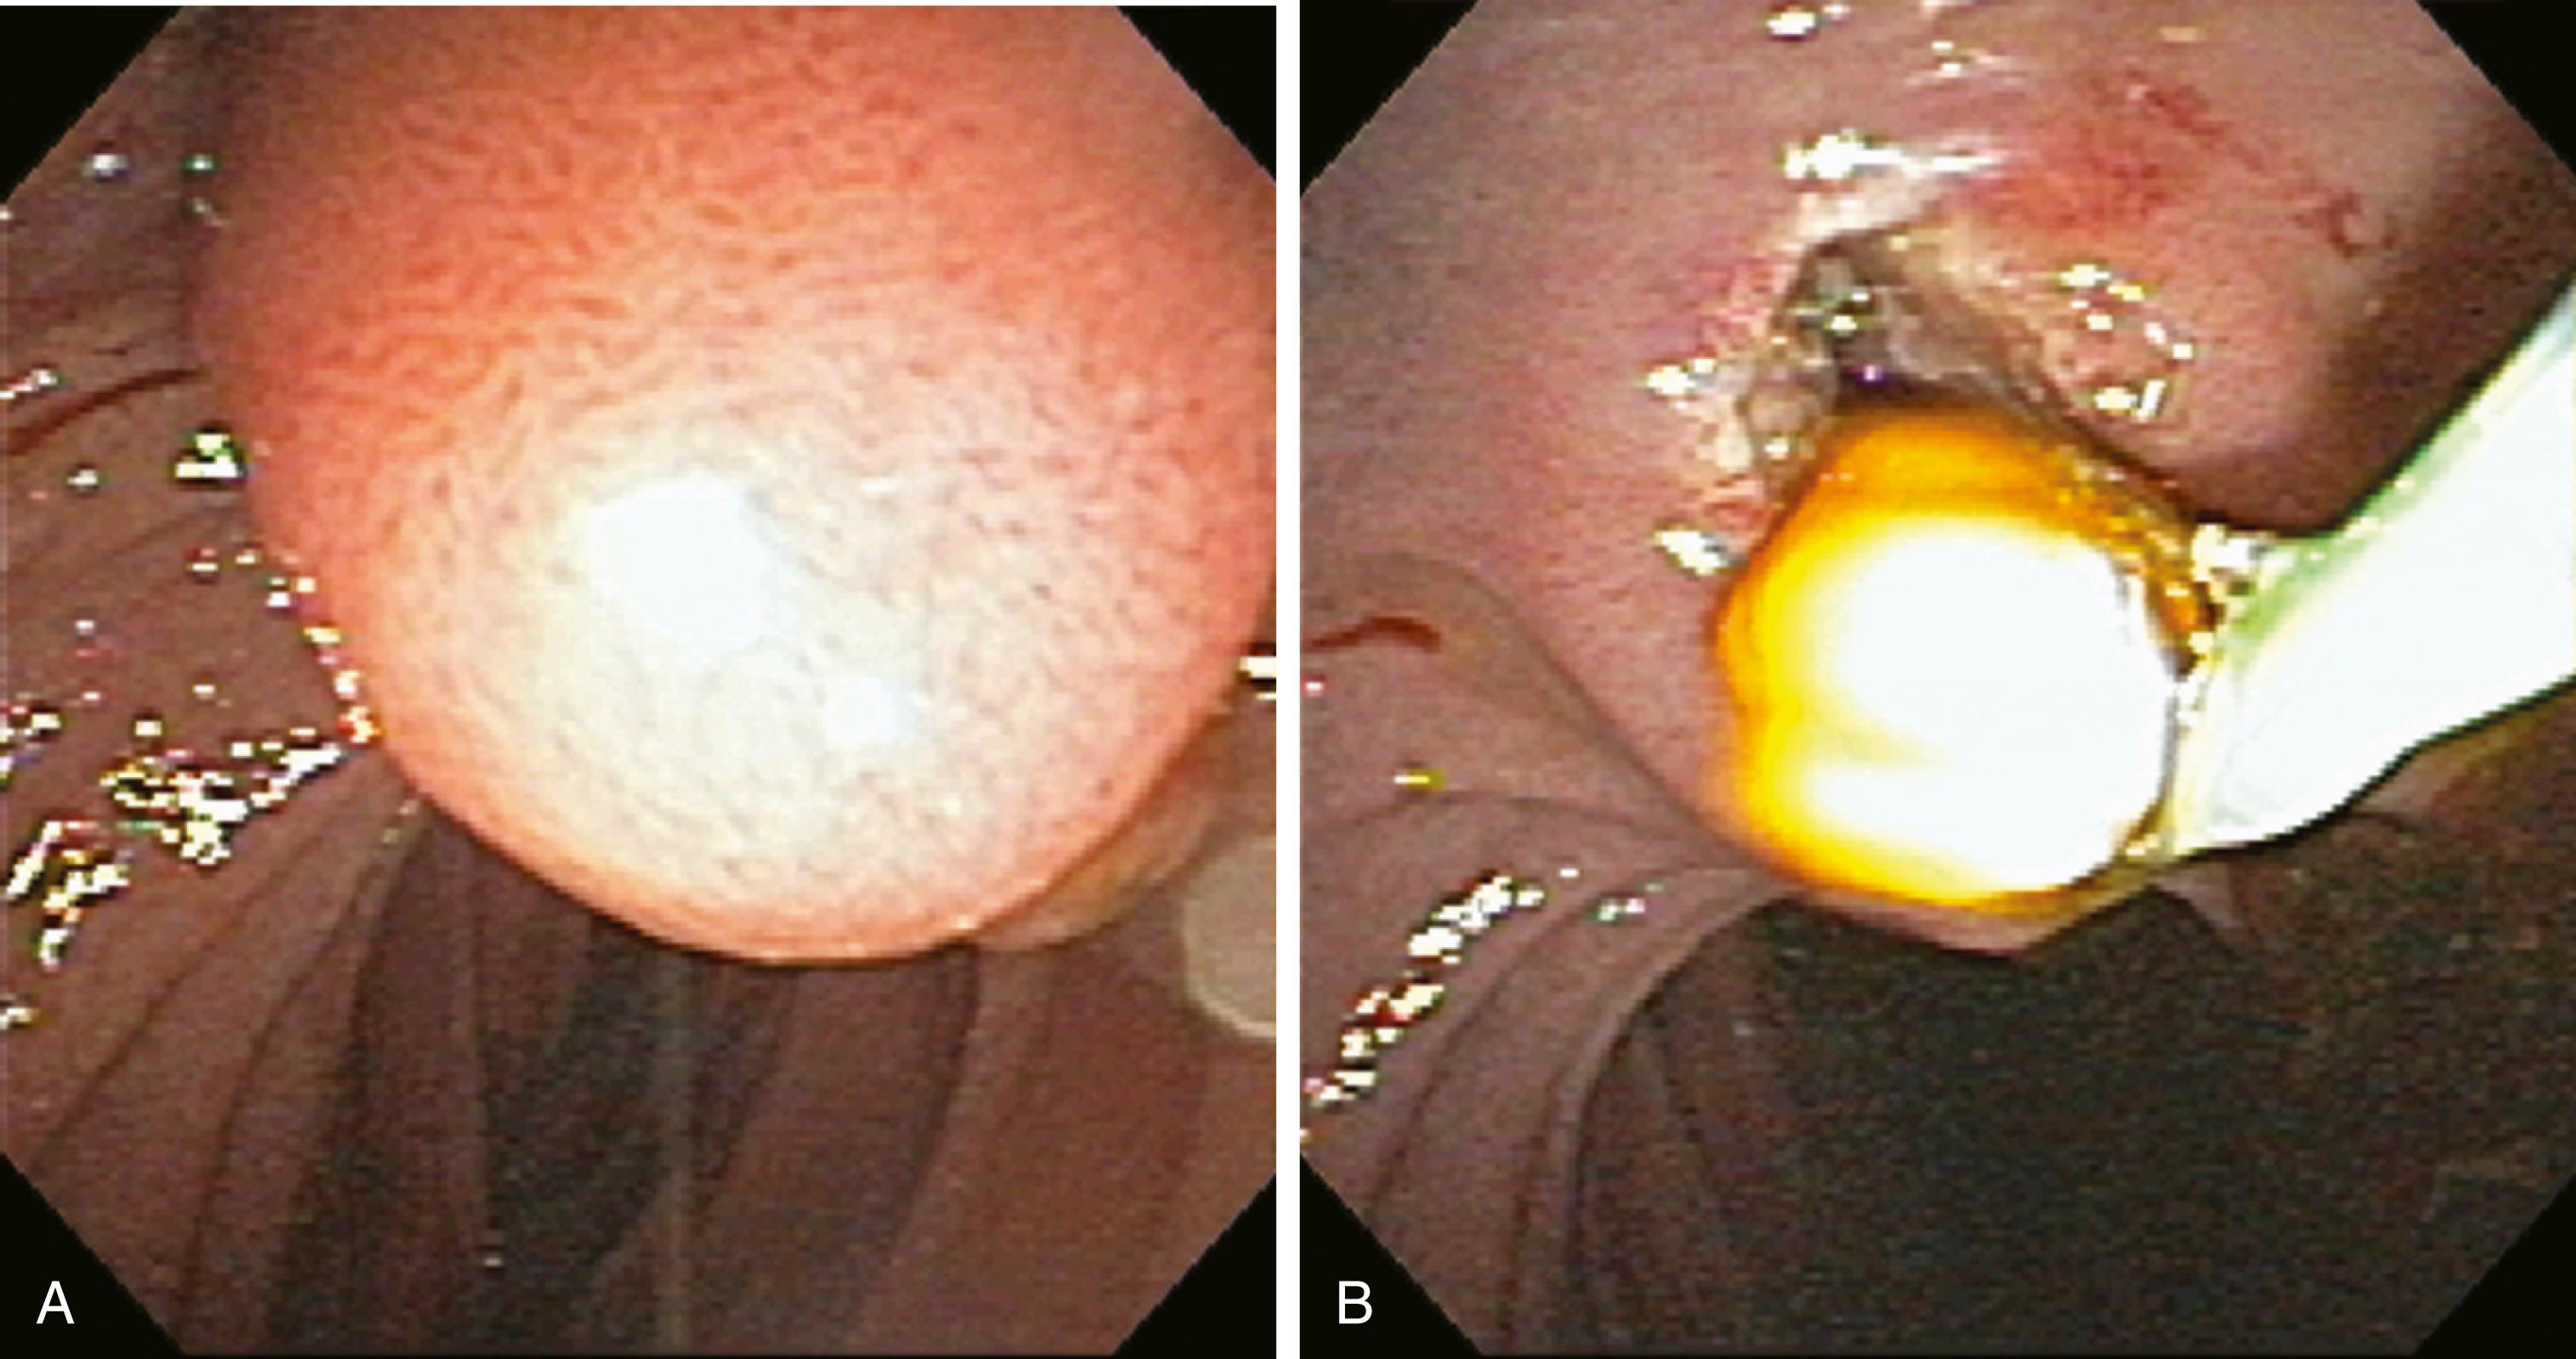 Fig. 70.5, Endoscopic images during removal of a bile duct stone. A, A bulging papilla consistent with an impacted stone is seen. B, After endoscopic sphincterotomy, the stone is extracted.